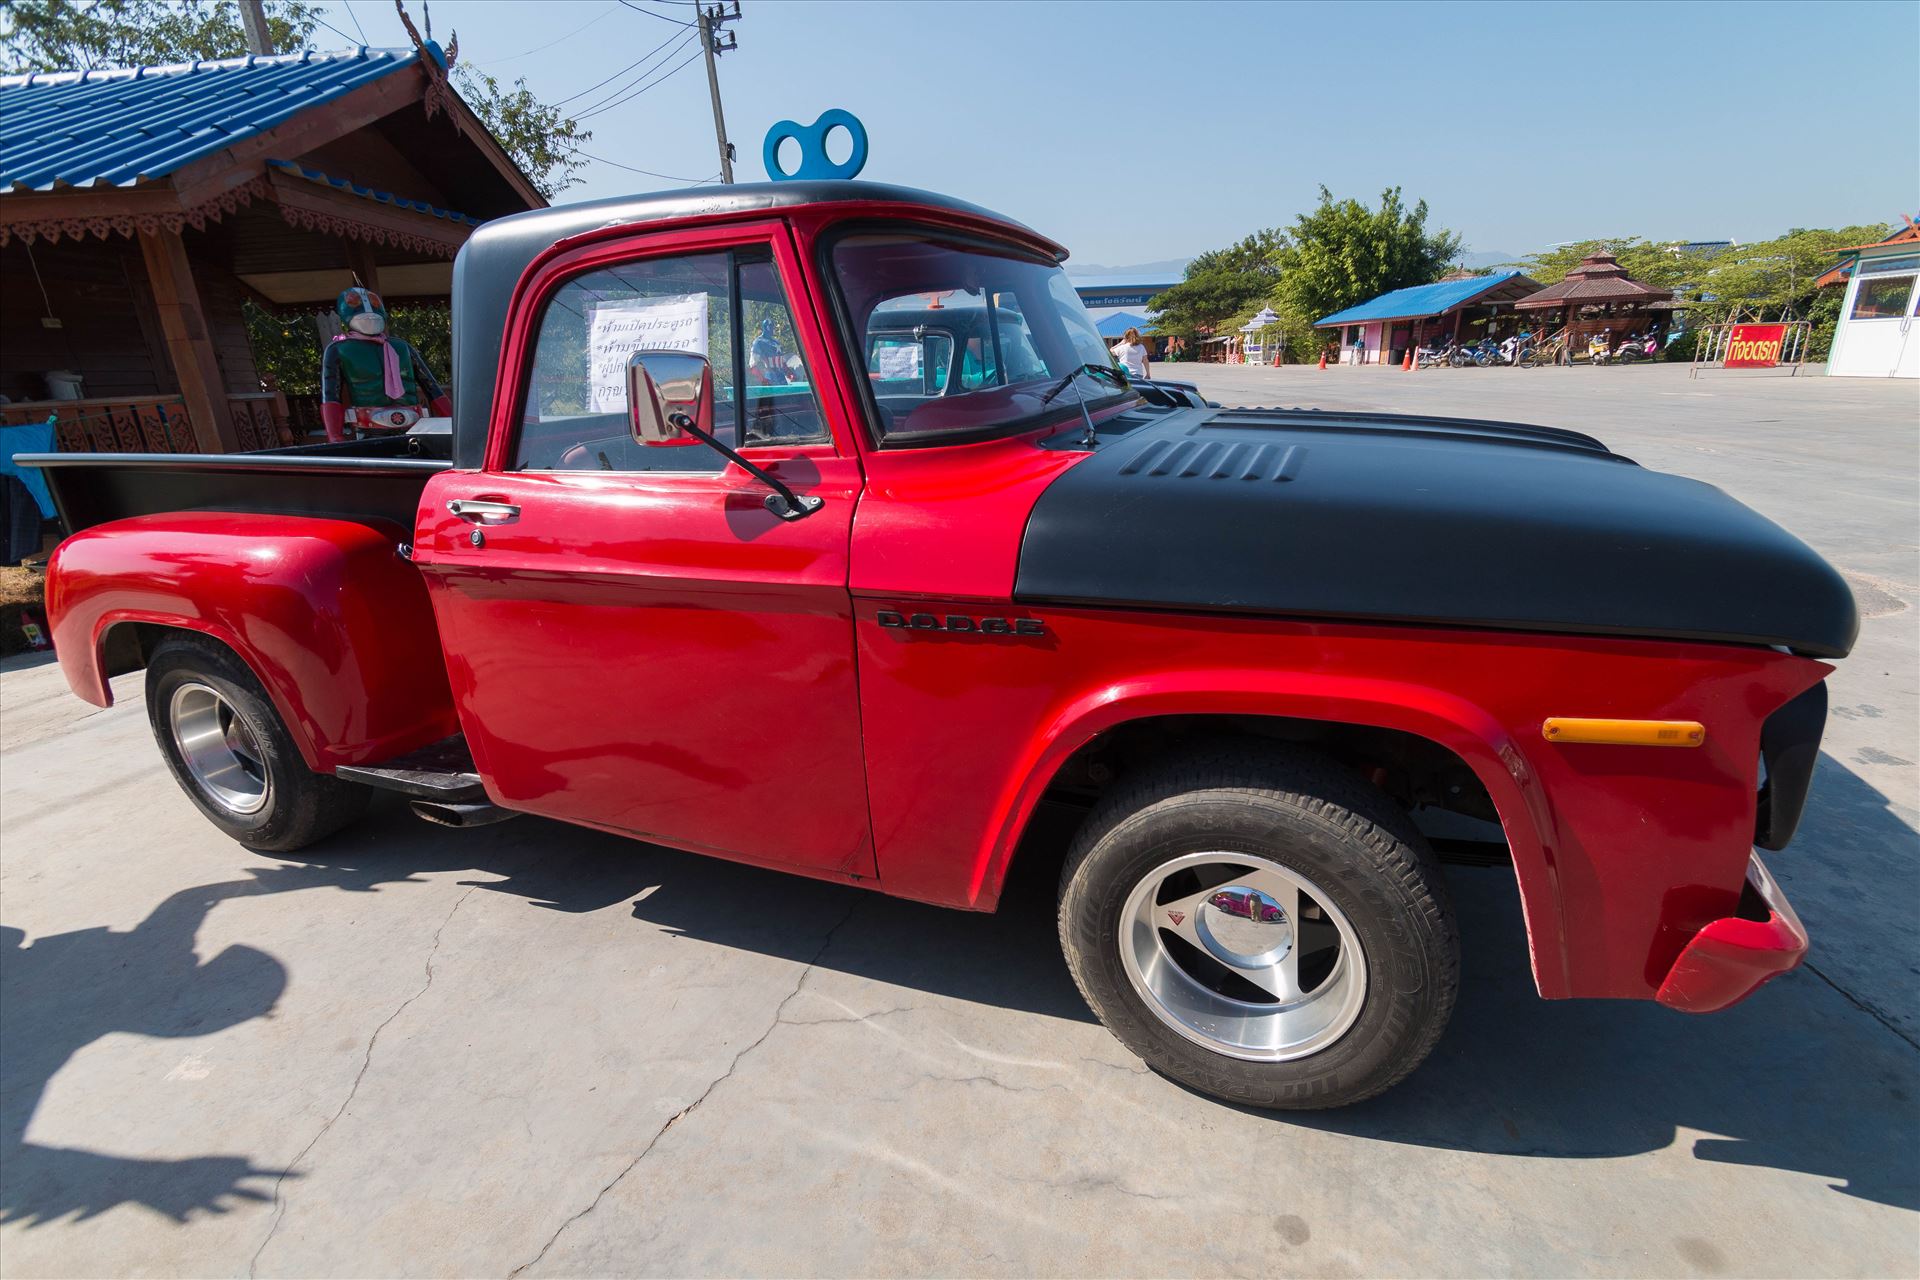 1967 vintage dodge pickup truck -  by AnnetteJohnsonPhotography